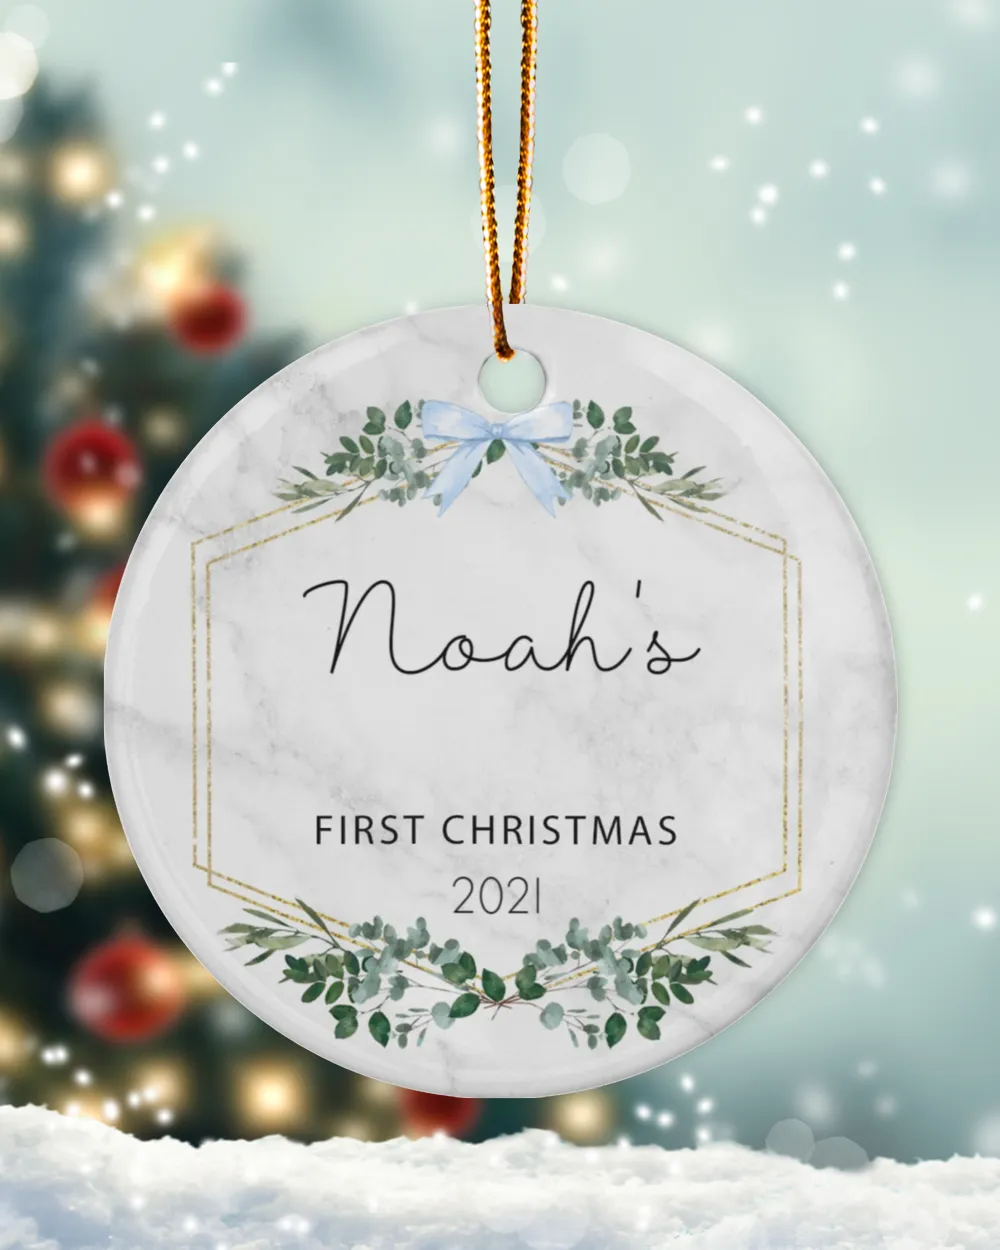 Baby's First Christmas Ornament - Baby Boy Ornament - Personalized First Christmas - Custom Baby Name Christmas Ornament - Blue Bow | Christmas Ornaments | Pine Tree Ornaments.